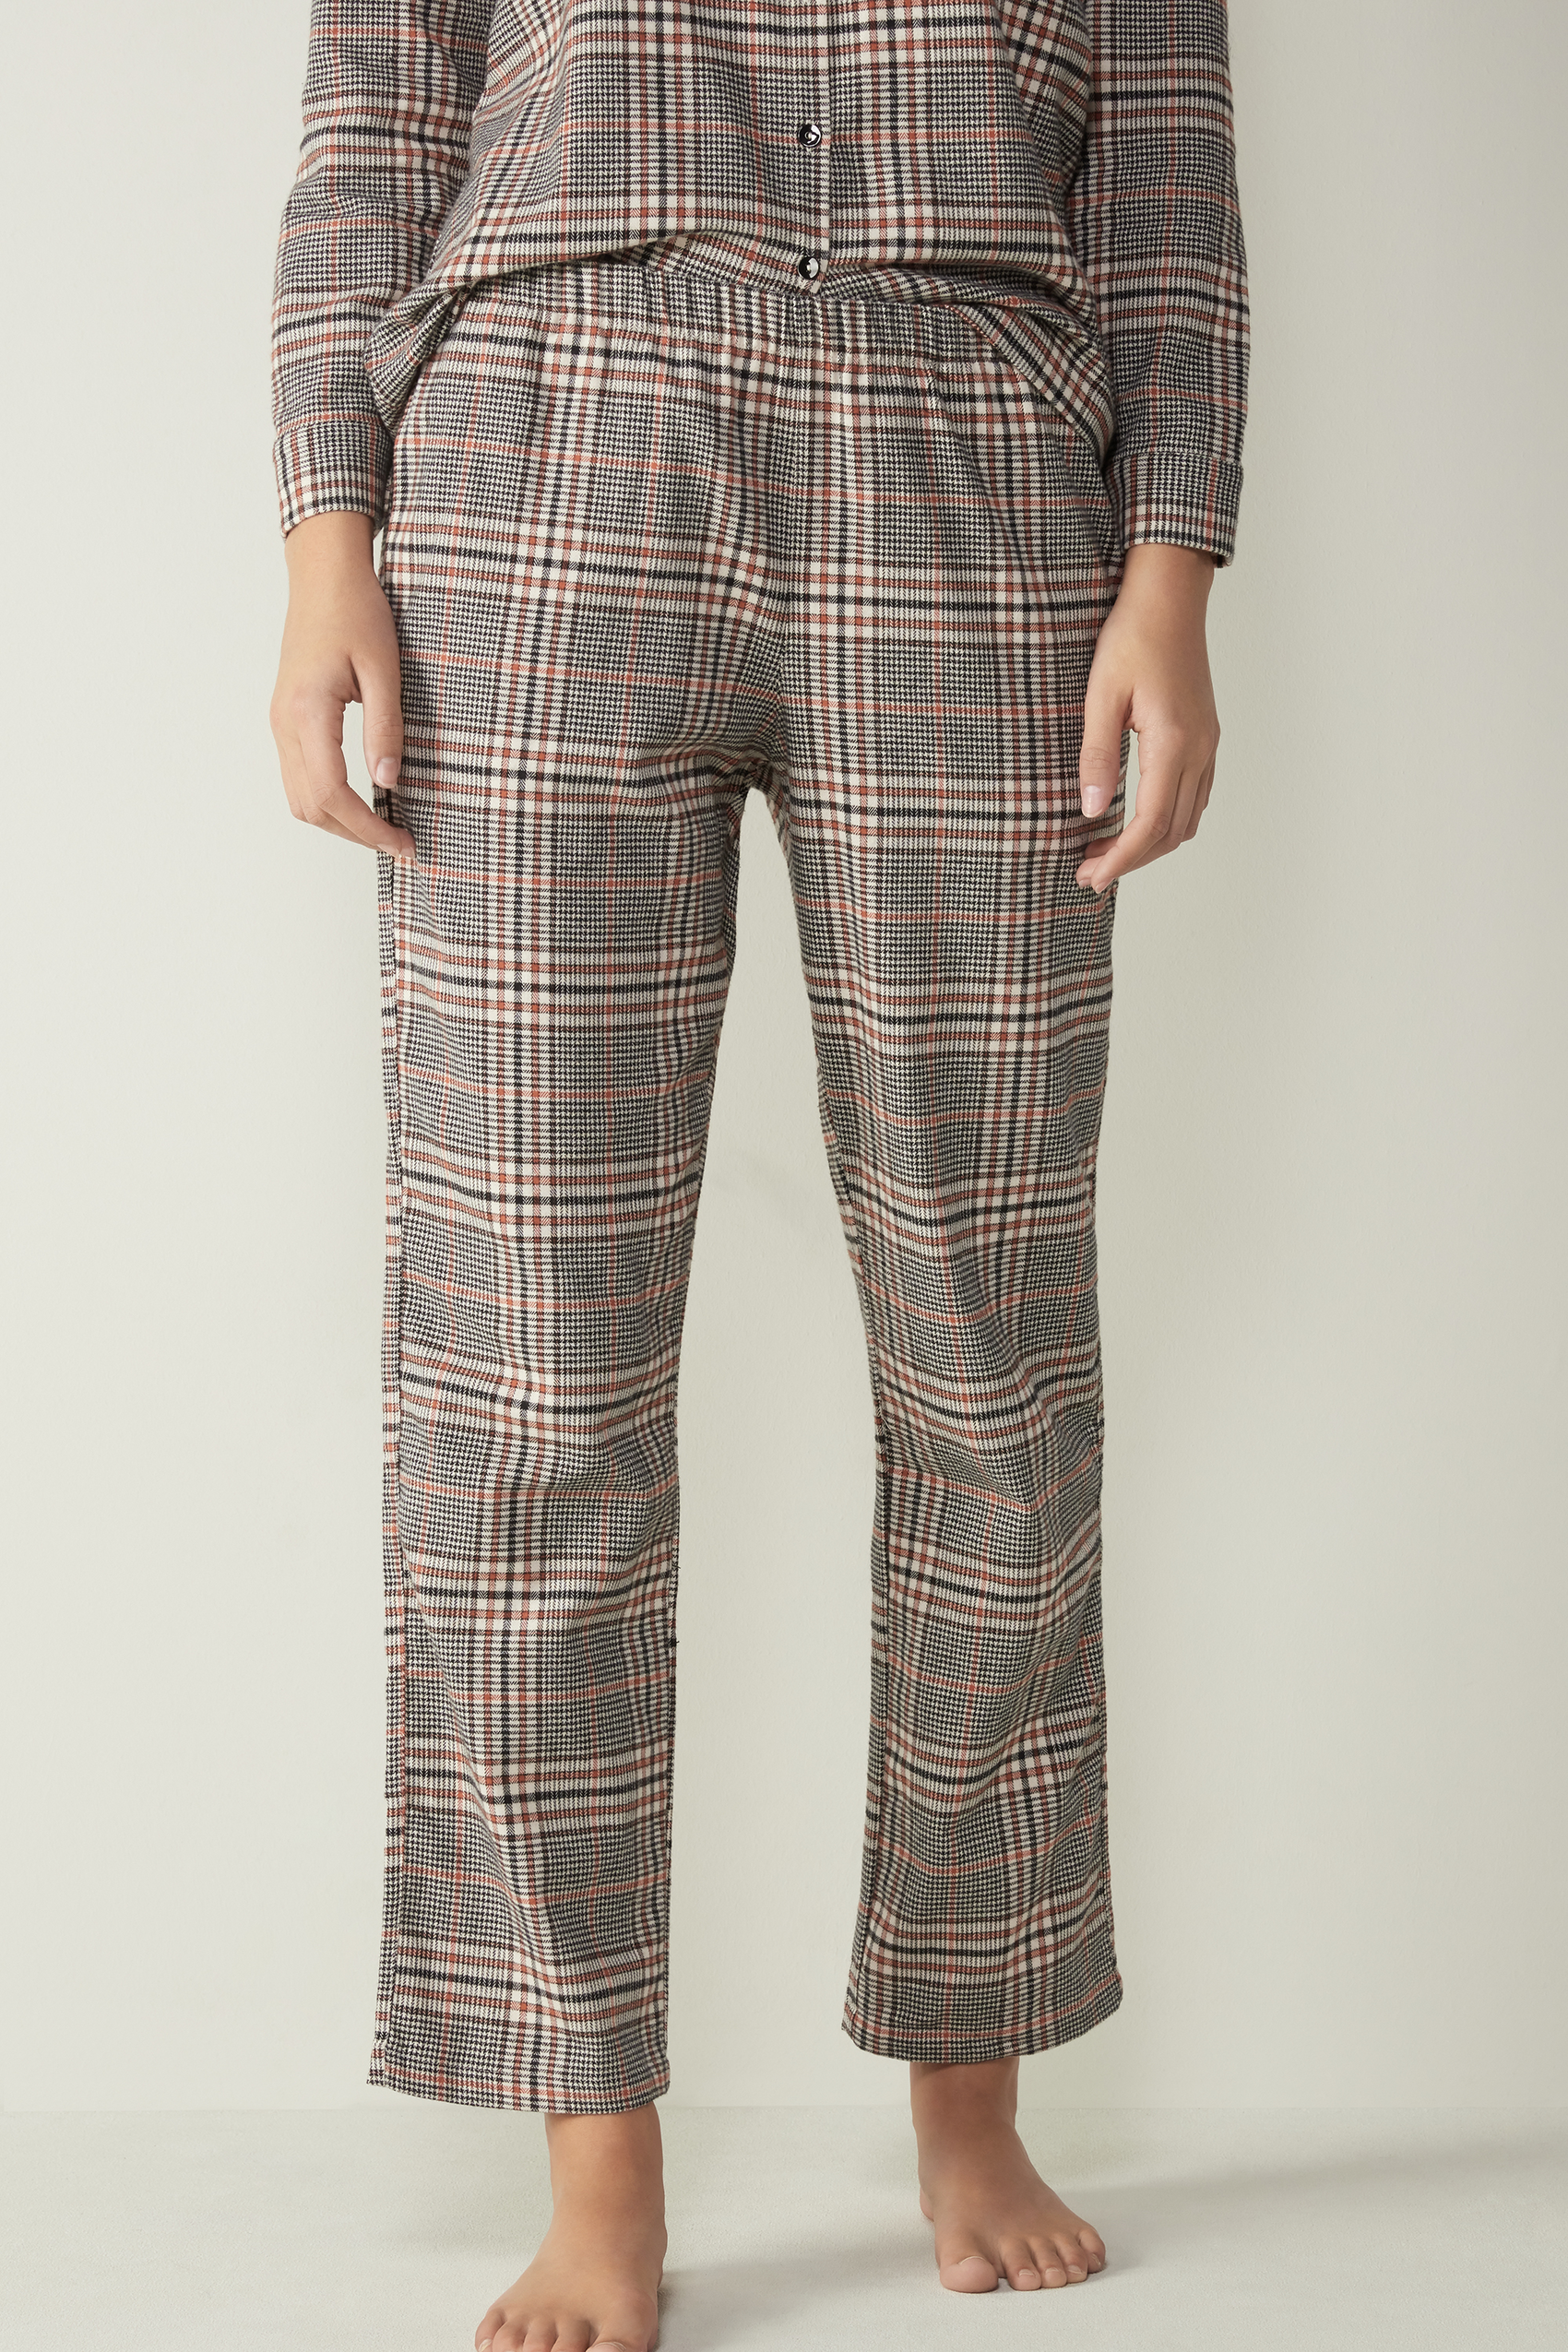 Tales of Wales Brushed Canvas Pyjama Bottoms | Intimissimi